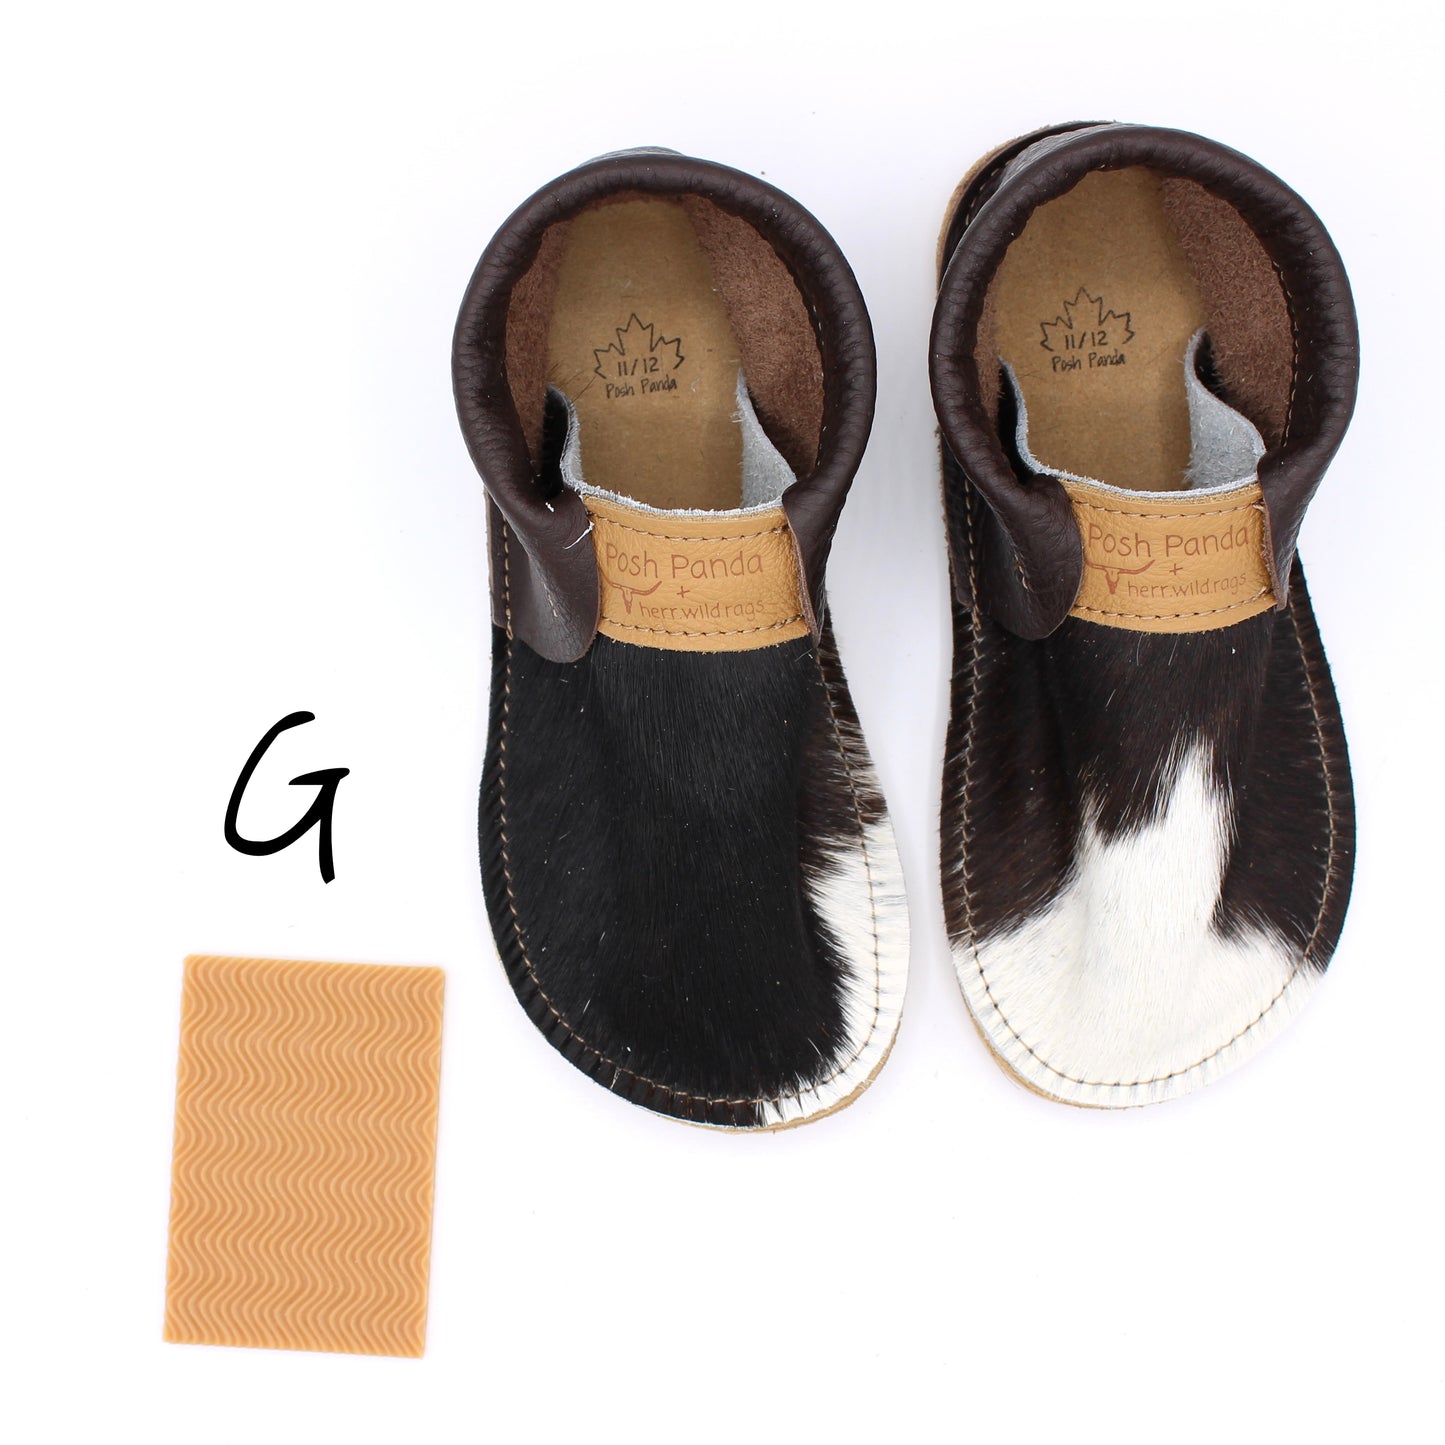 Hair Hide Mocs - TODDLER - Size 11/12 (4mm Sole)